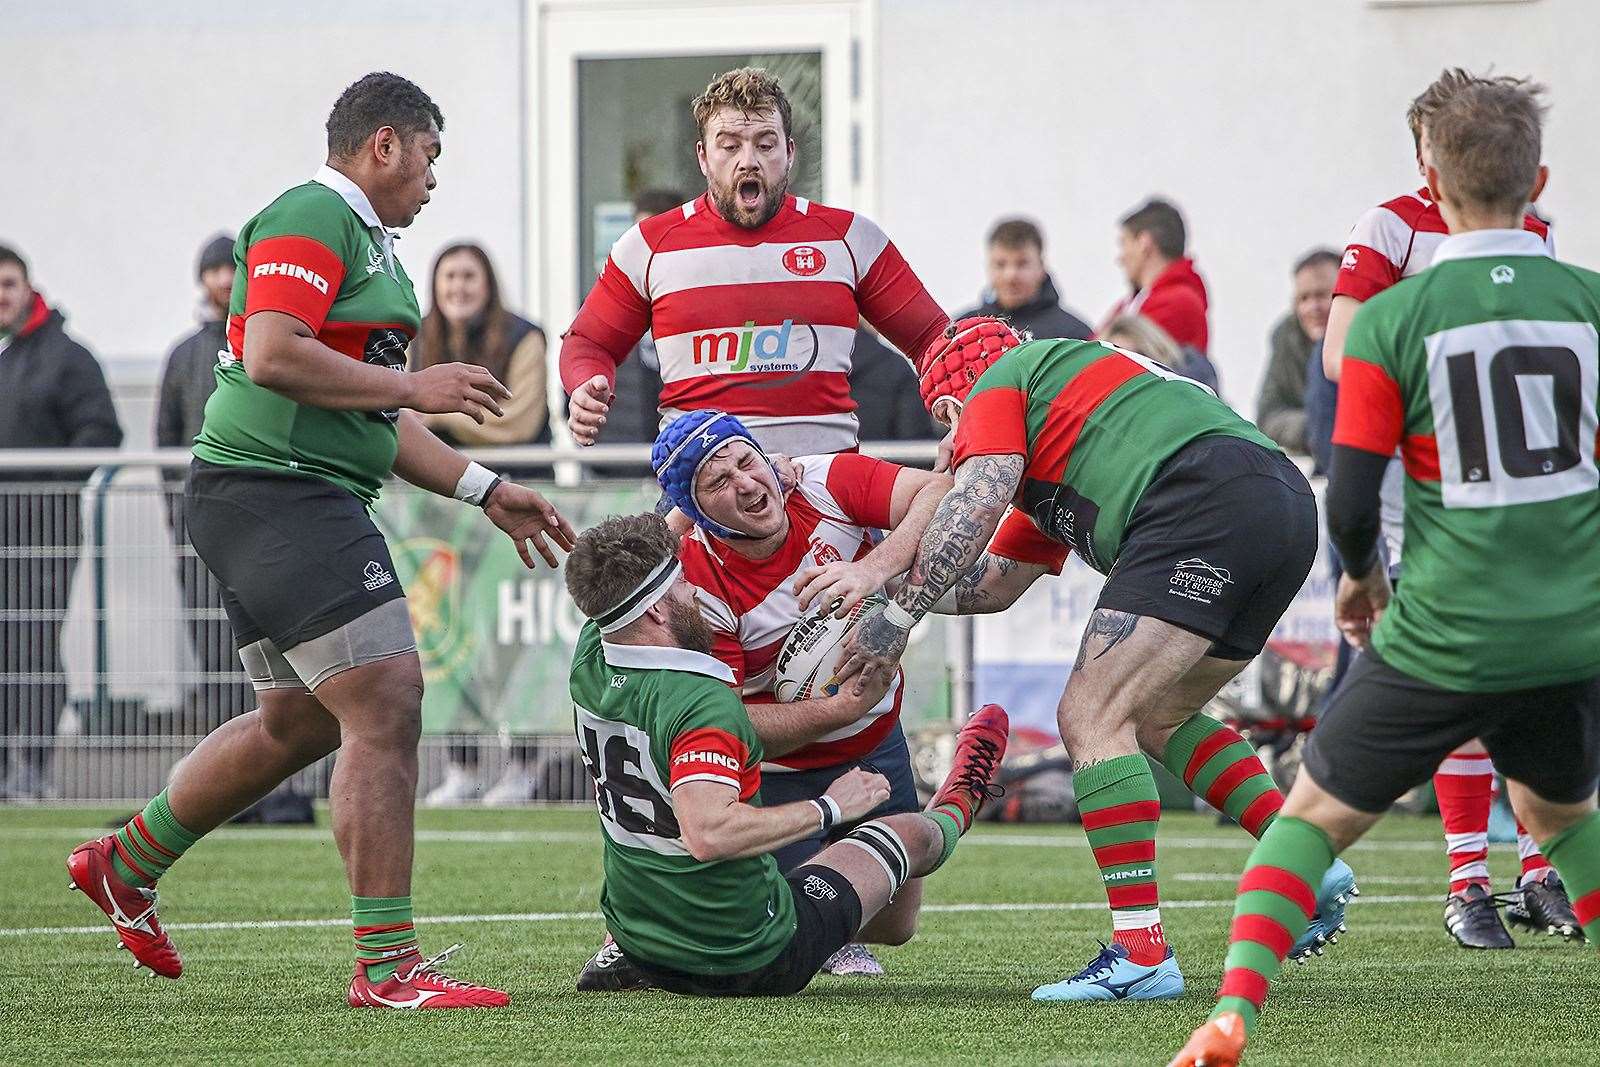 Moray's David Clarke tackled with Calum Smith in support. Photo: John Macgregor